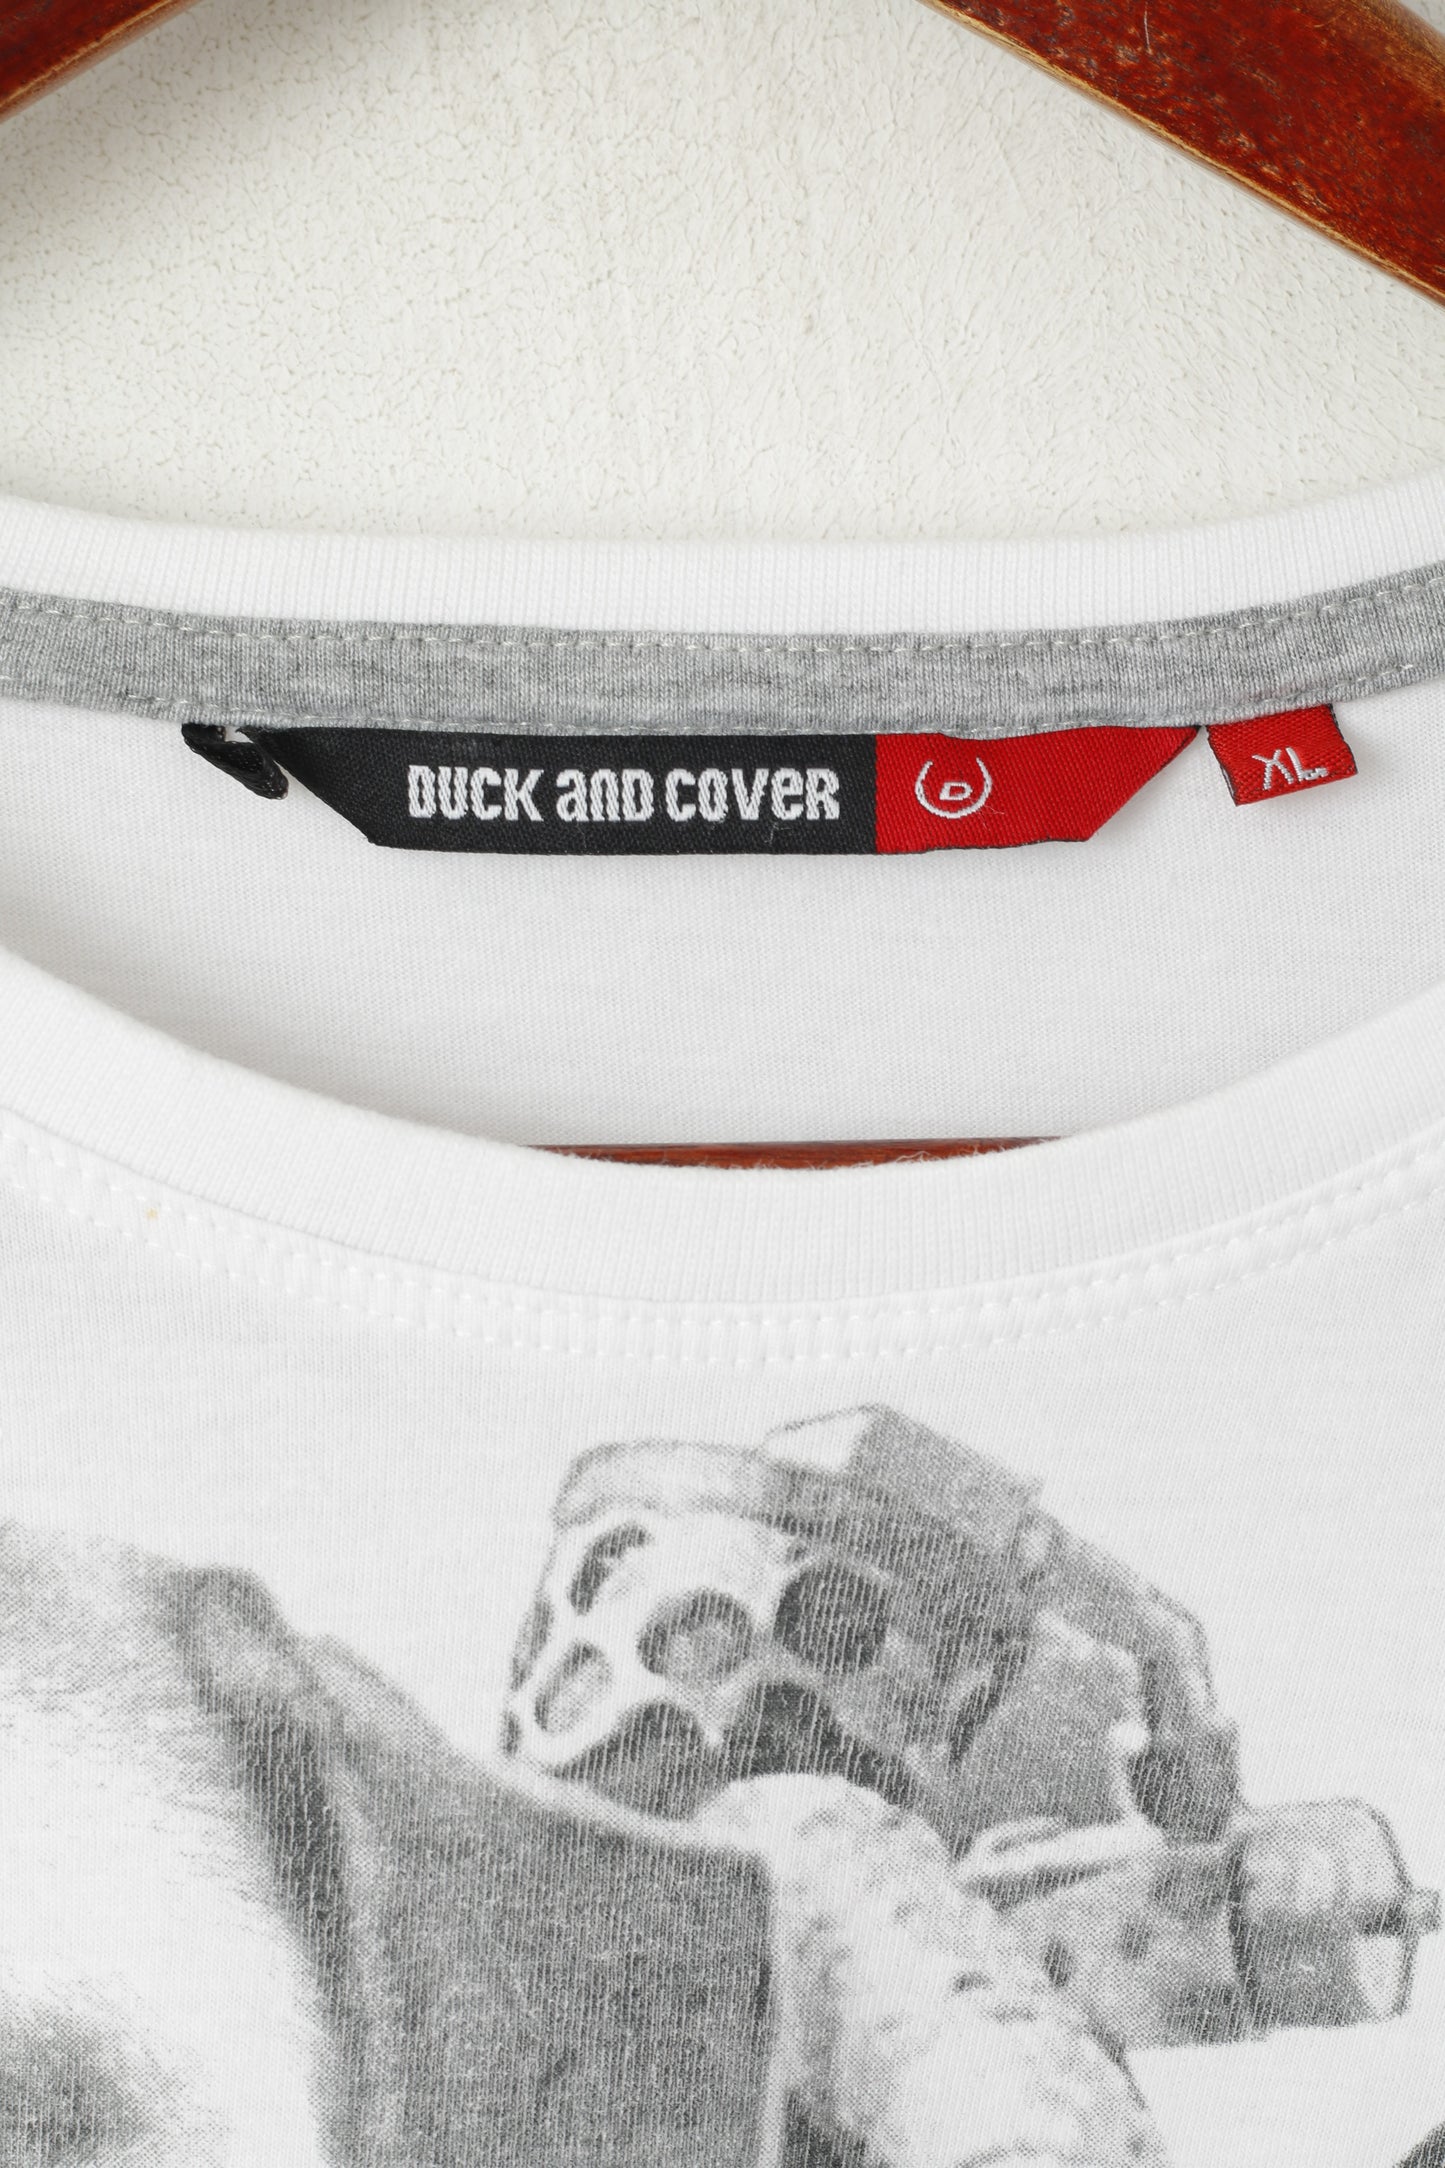 Duck and Cover Men XL (L) T-Shirt Blanc Coton Graphique Col Rond Carlin Jeatpag Top